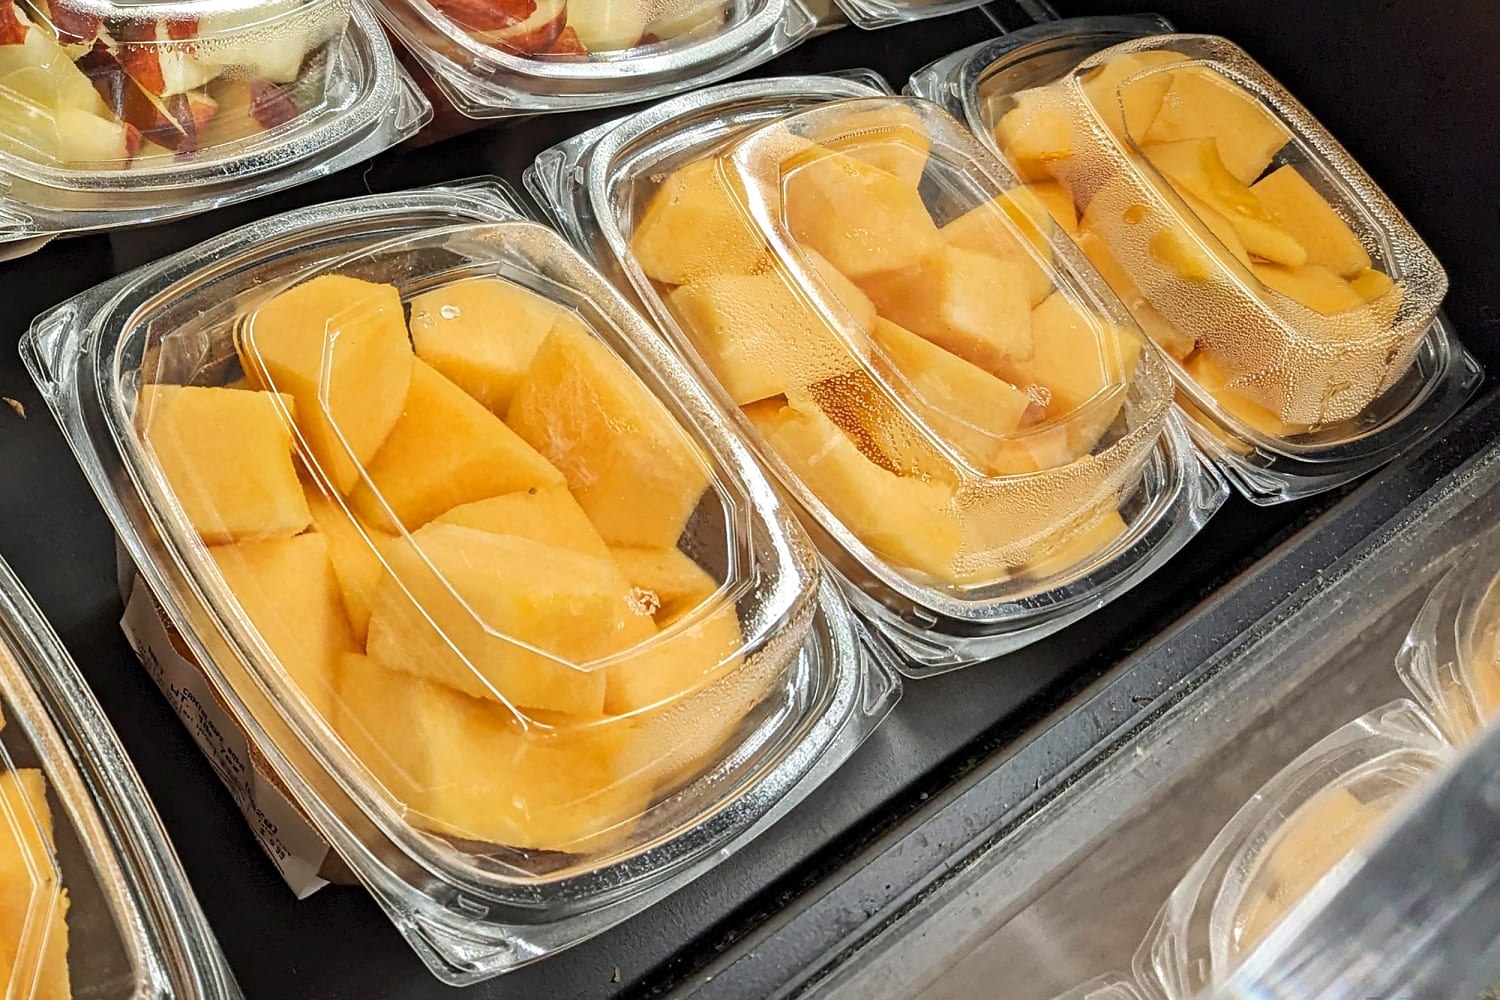 Deaths from tainted cantaloupe rise to 8 in U.S. and Canada